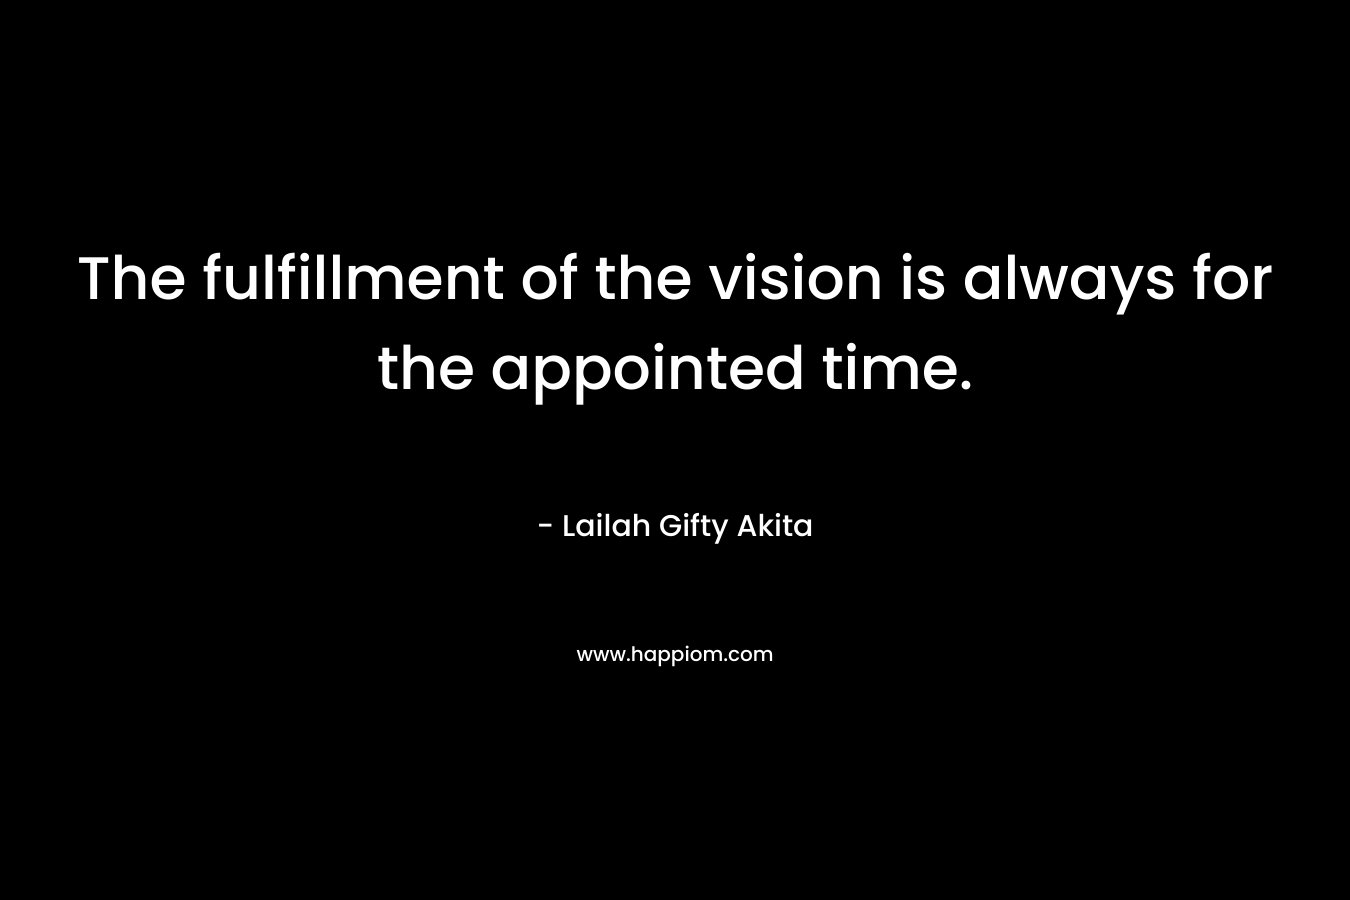 The fulfillment of the vision is always for the appointed time.